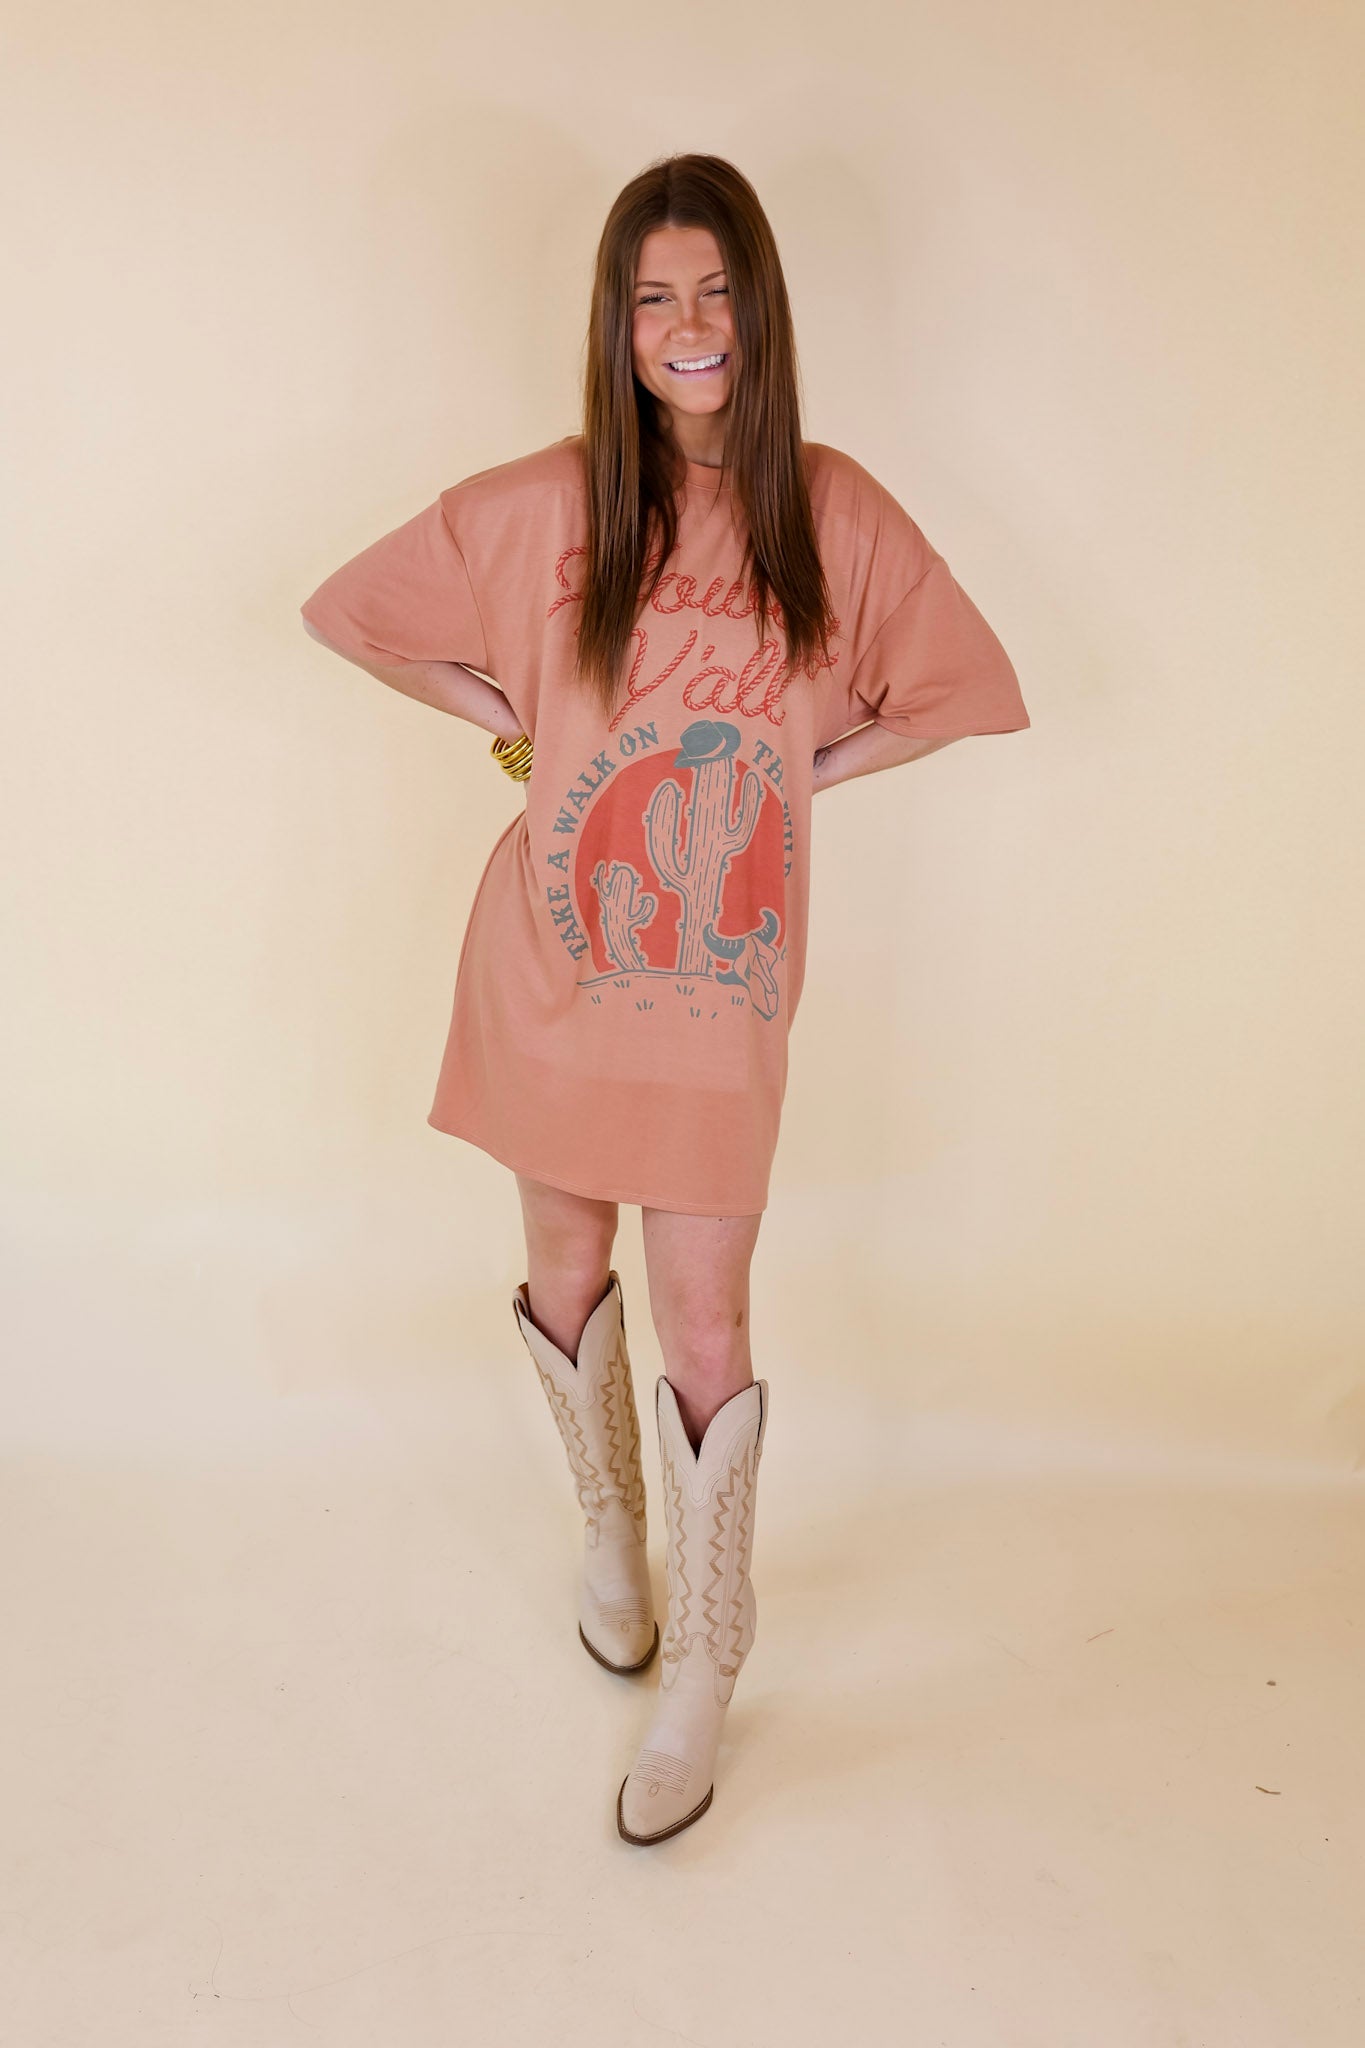 Howdy Y'all Short Sleeve Tee Shirt Dress in Clay Orange - Giddy Up Glamour Boutique